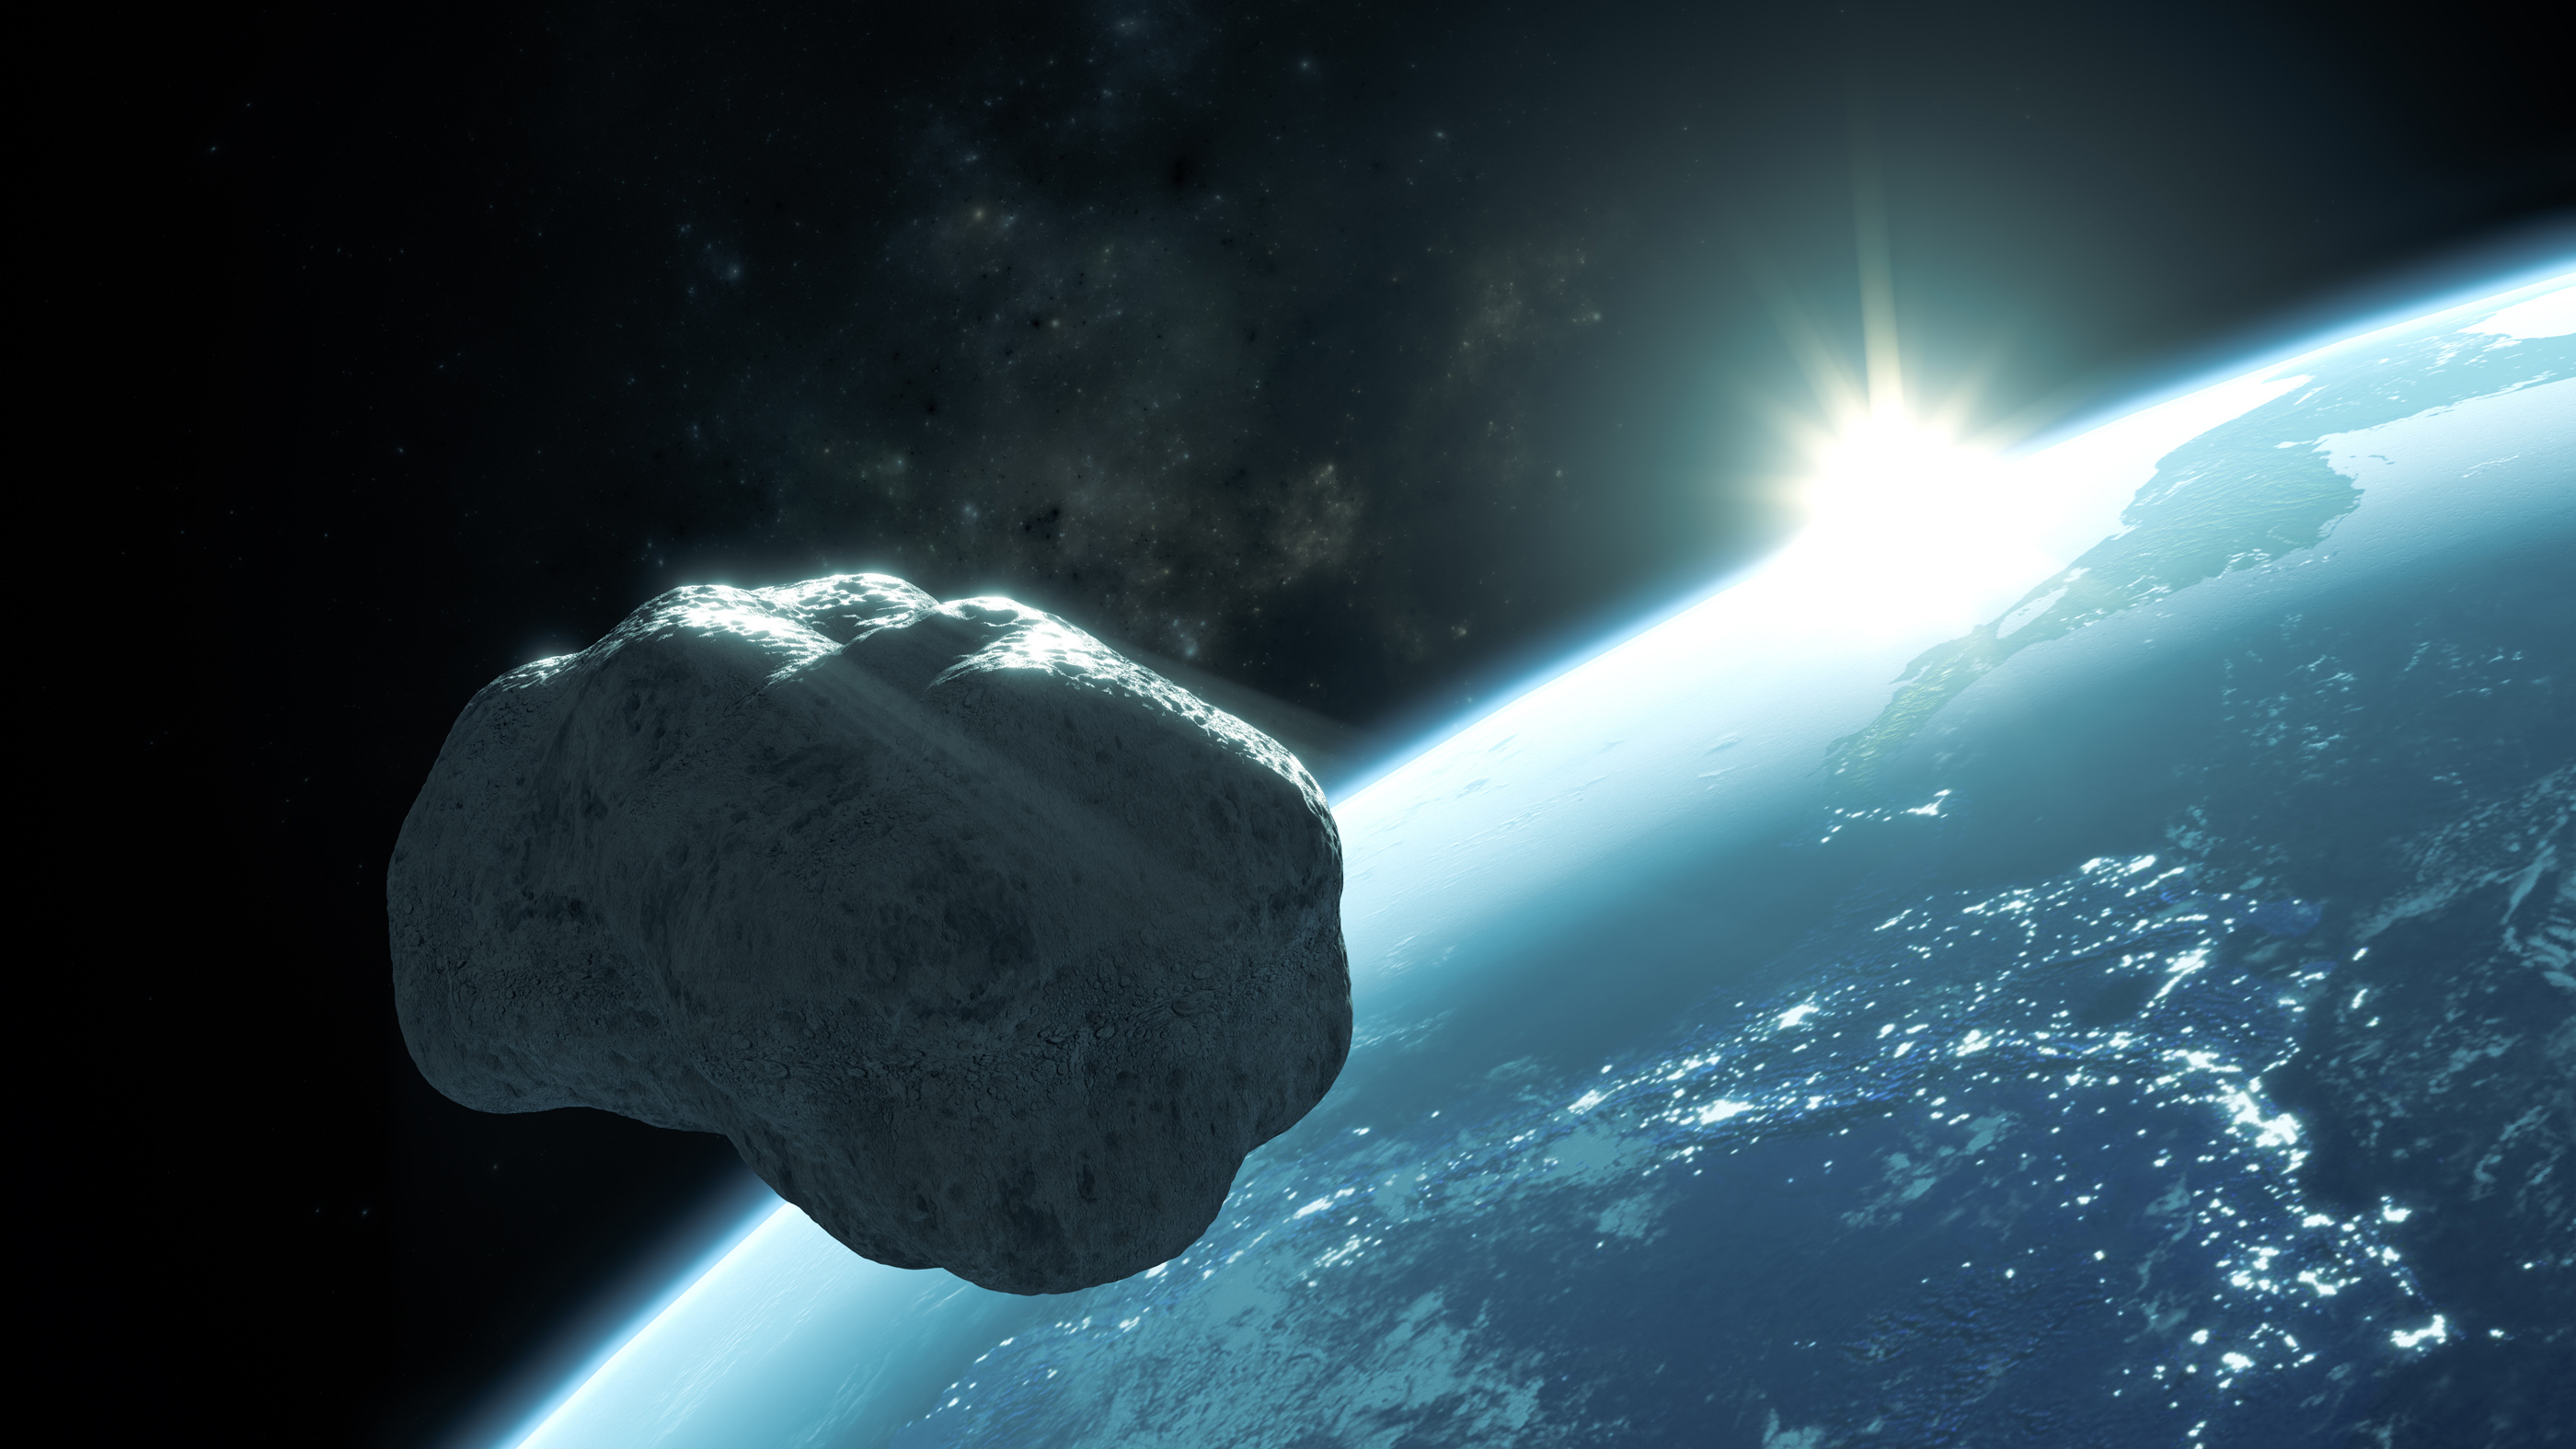 Can a Comet Collision Destroy the Earth?